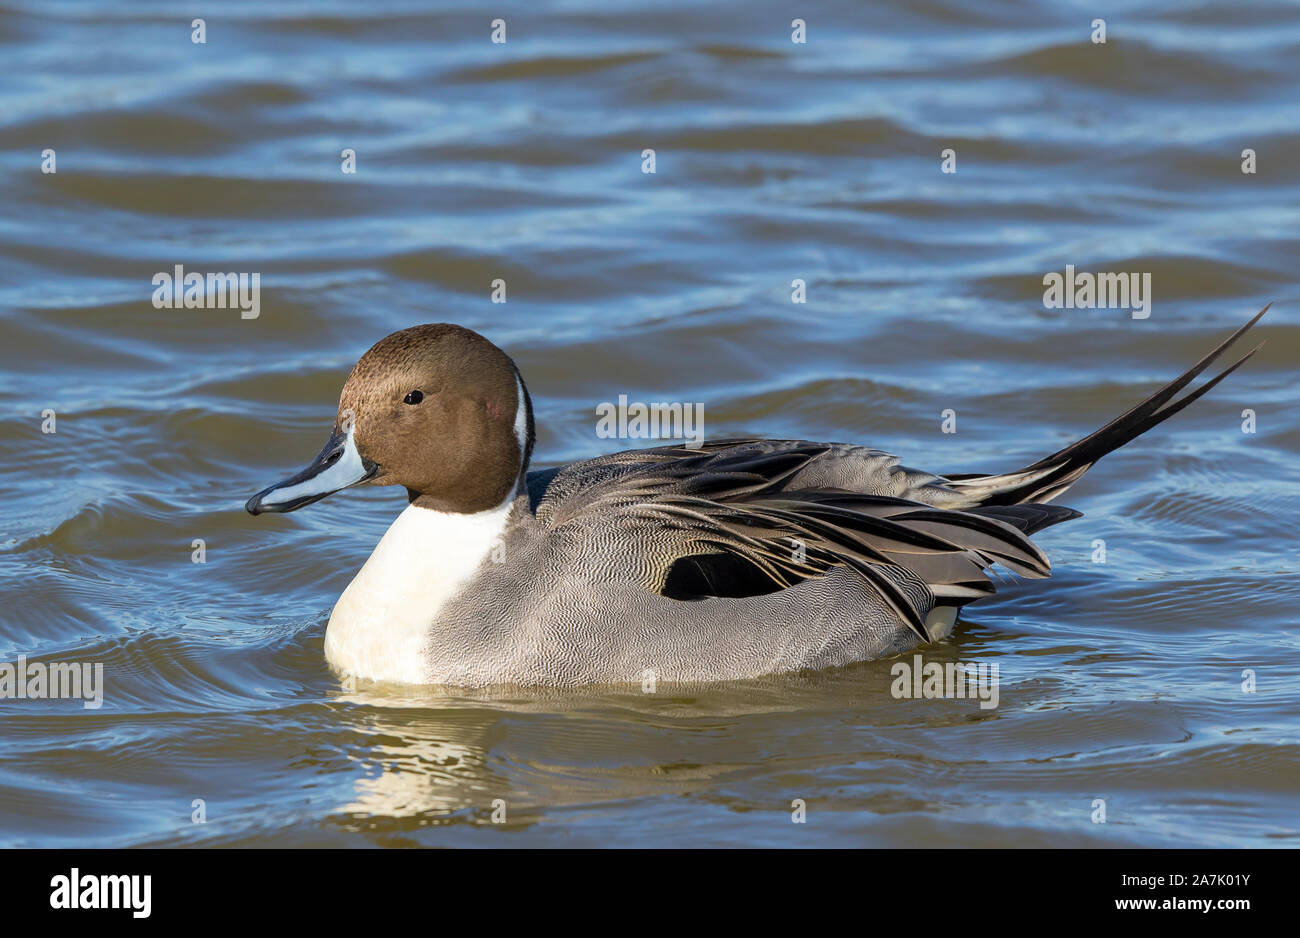 Close, side view of a wild, UK Northern pintail duck (Anas acuta) isolated outdoors in water swimming in sunshine. Stock Photo